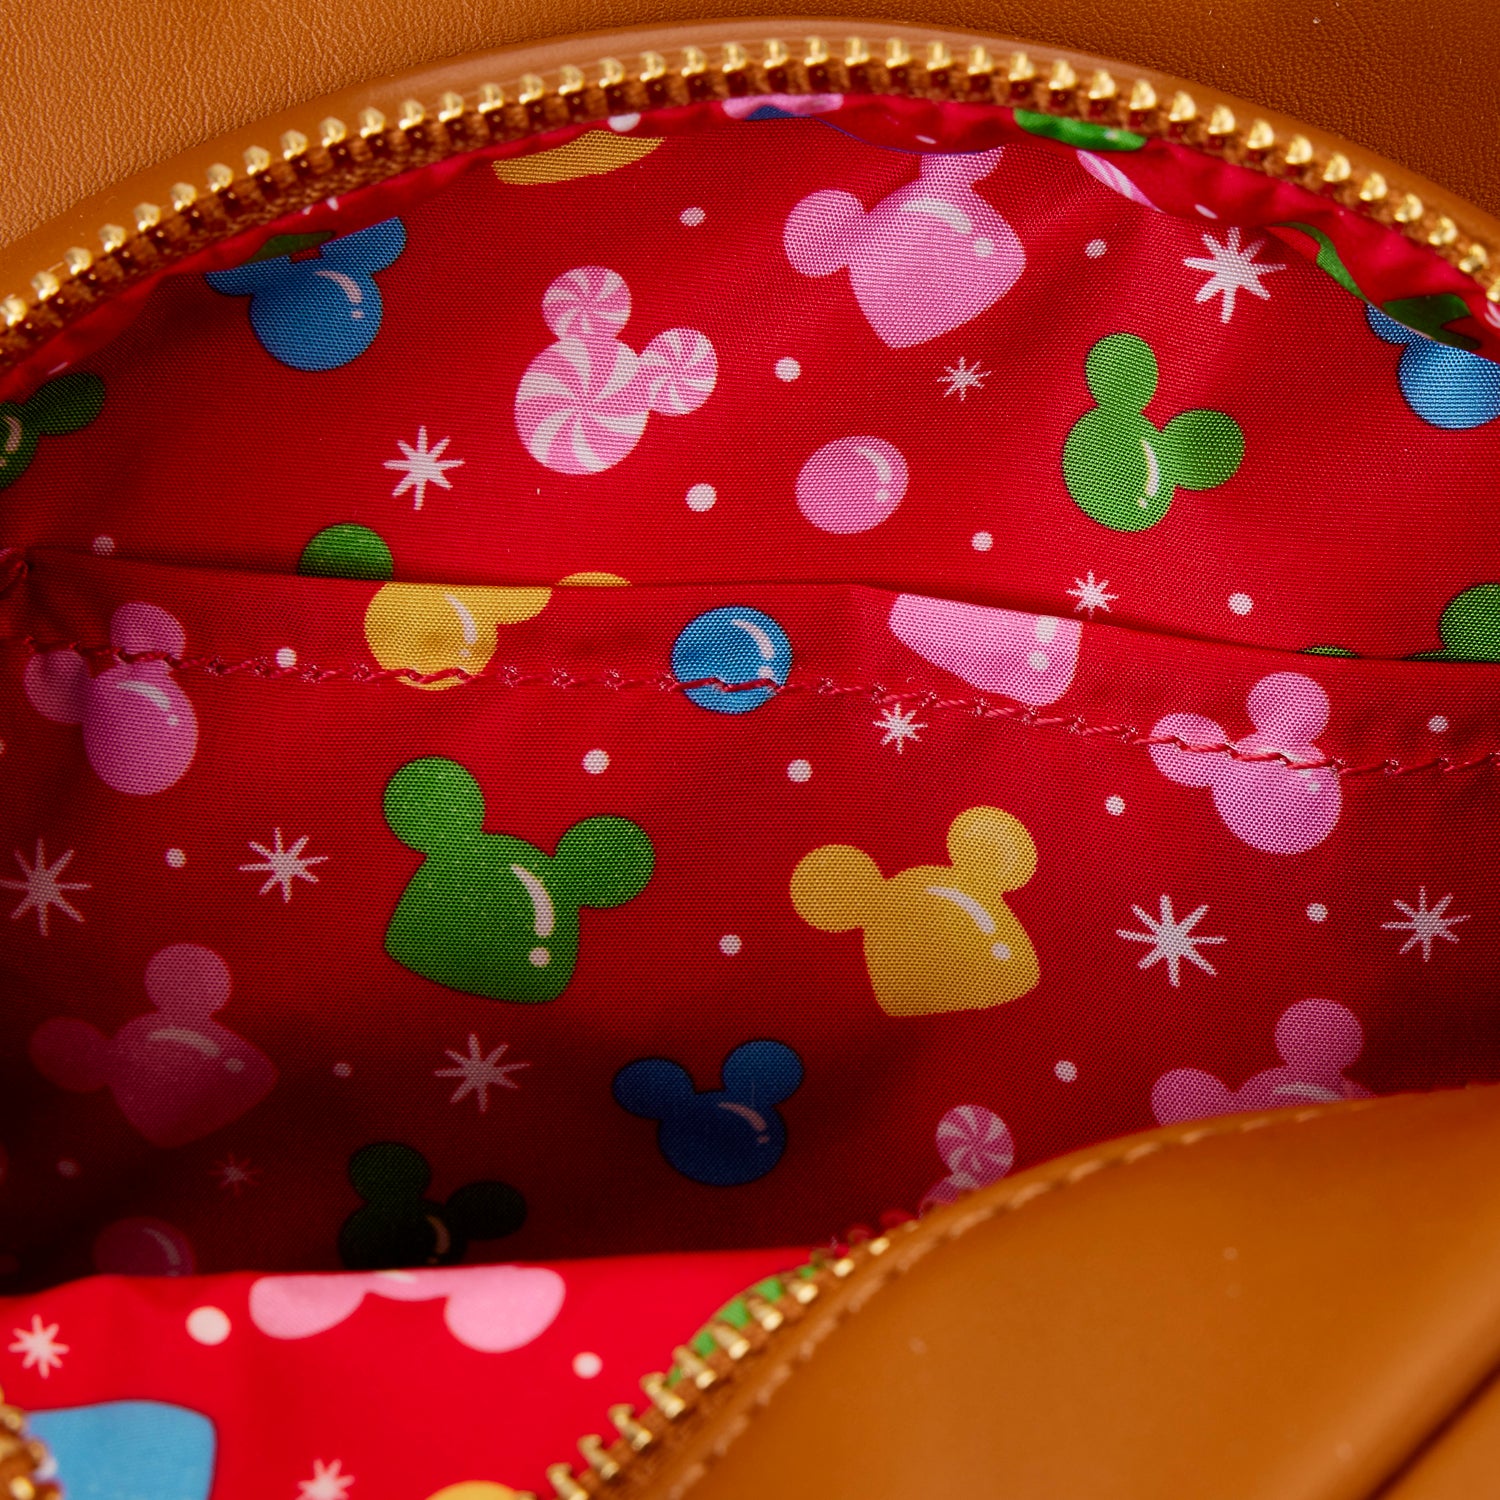 Loungefly x Disney Mickey and Minnie Gingerbread Cookie Figural Crossbody Bag